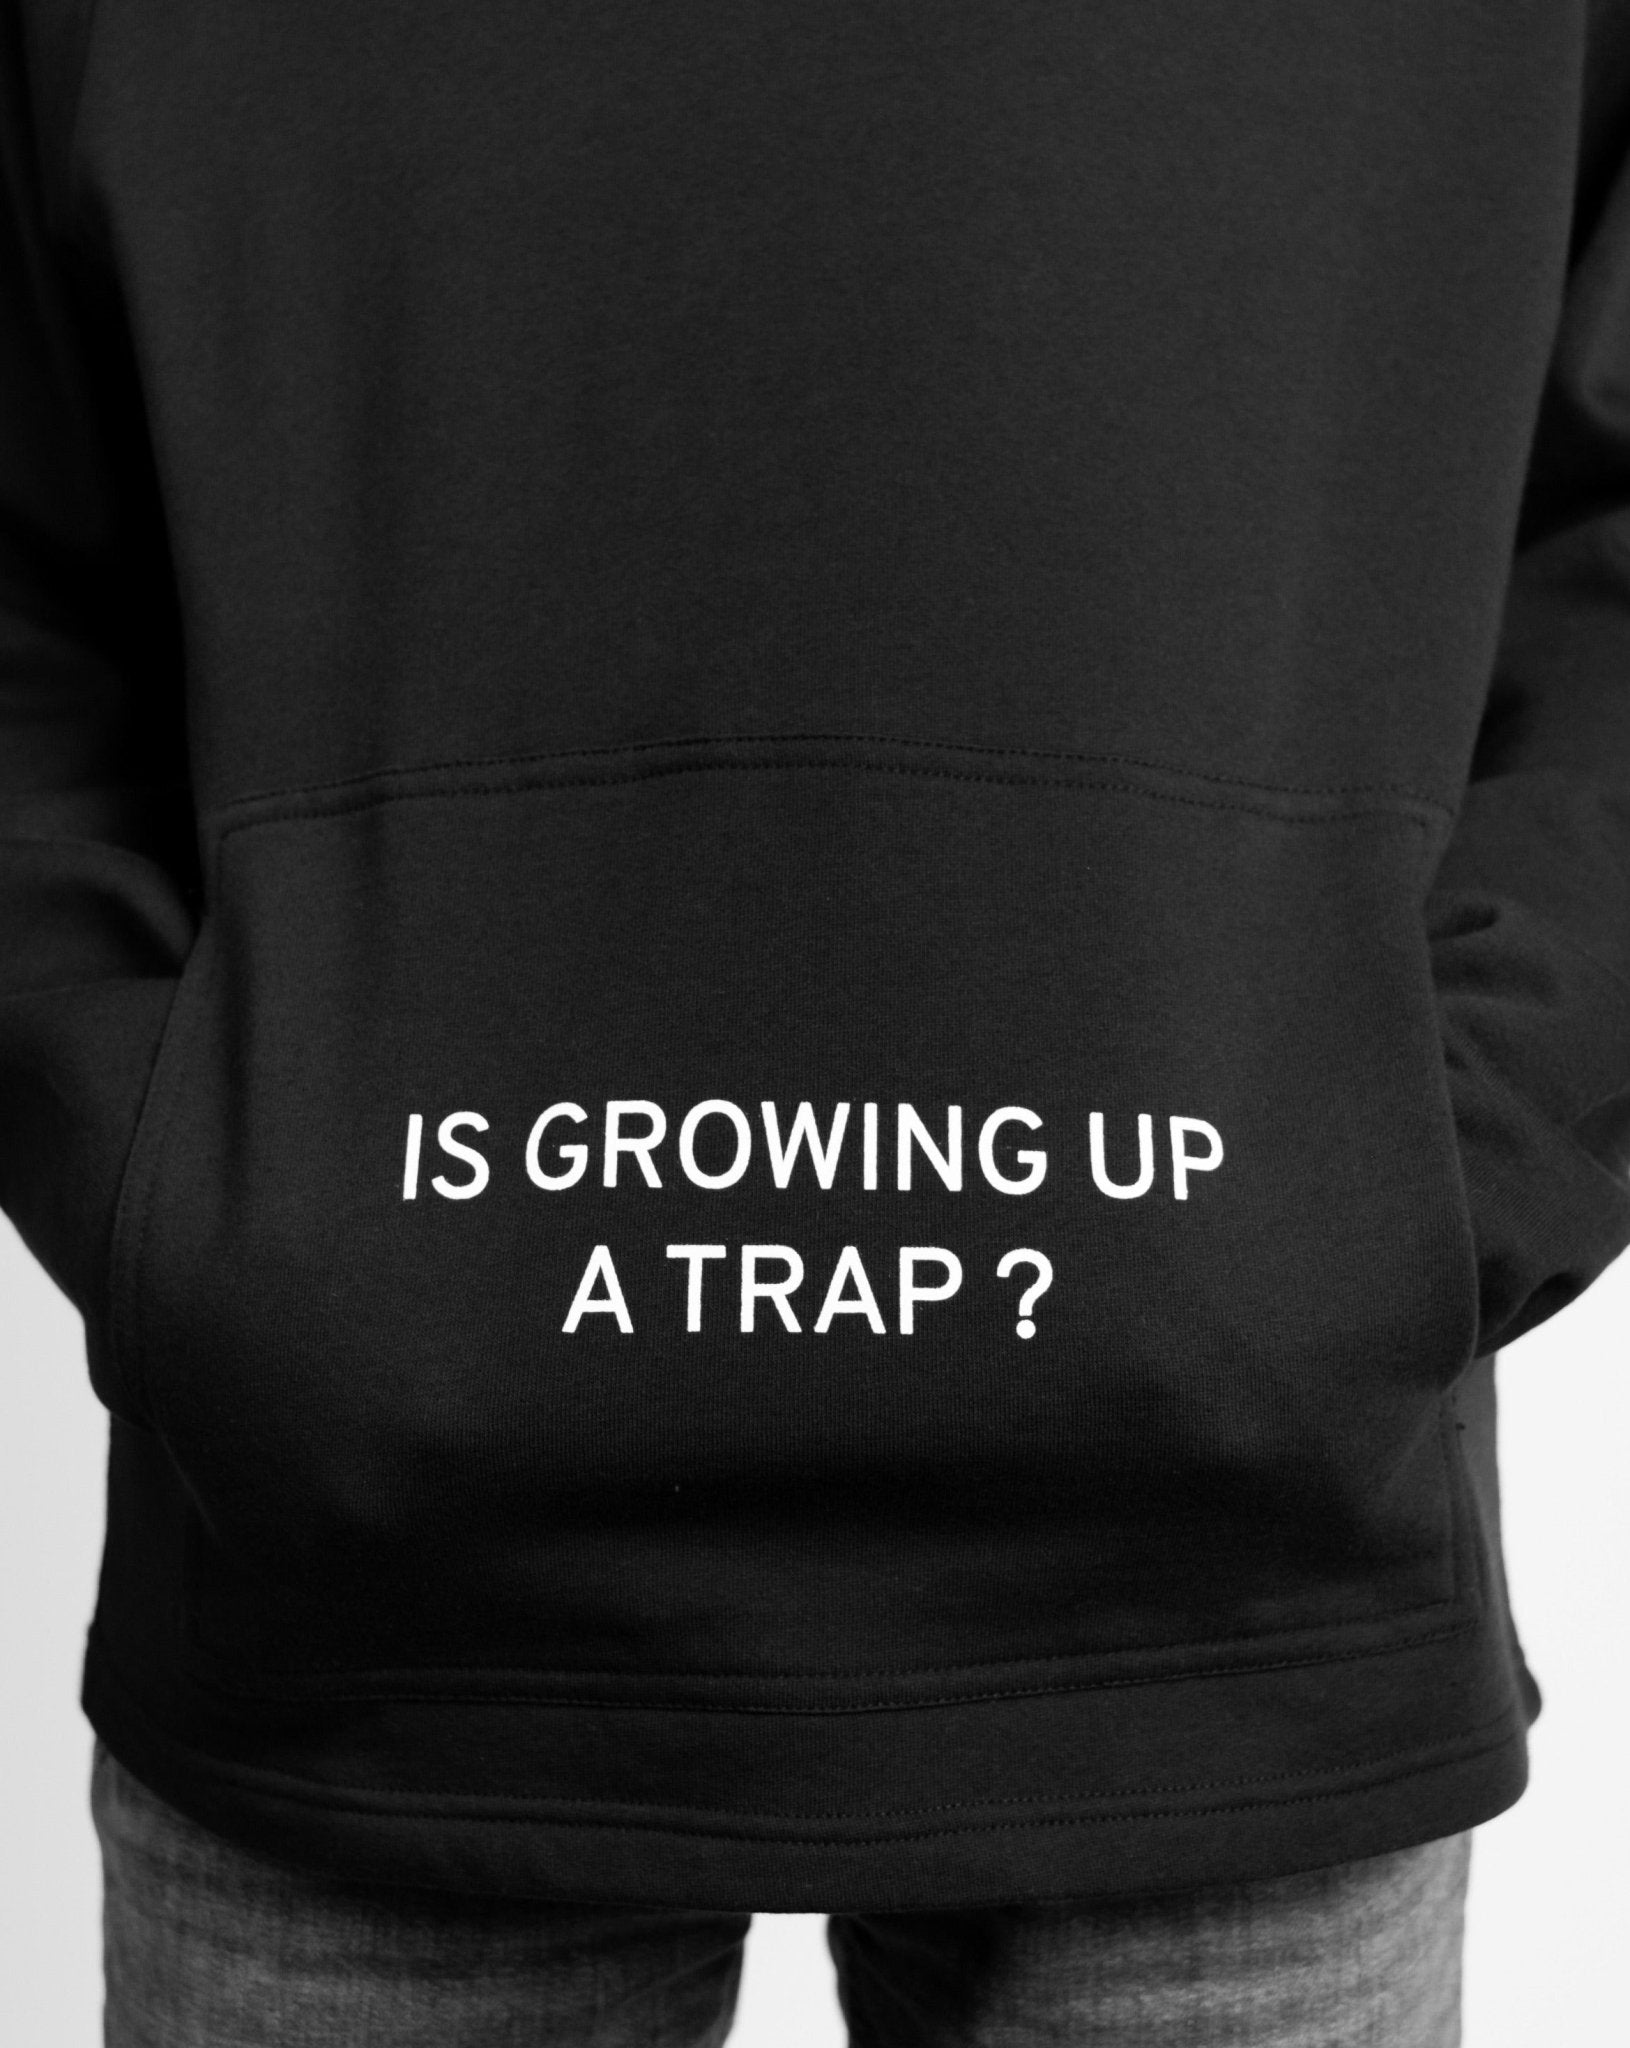 Is growing up a trap? - OBLIVIOUS?